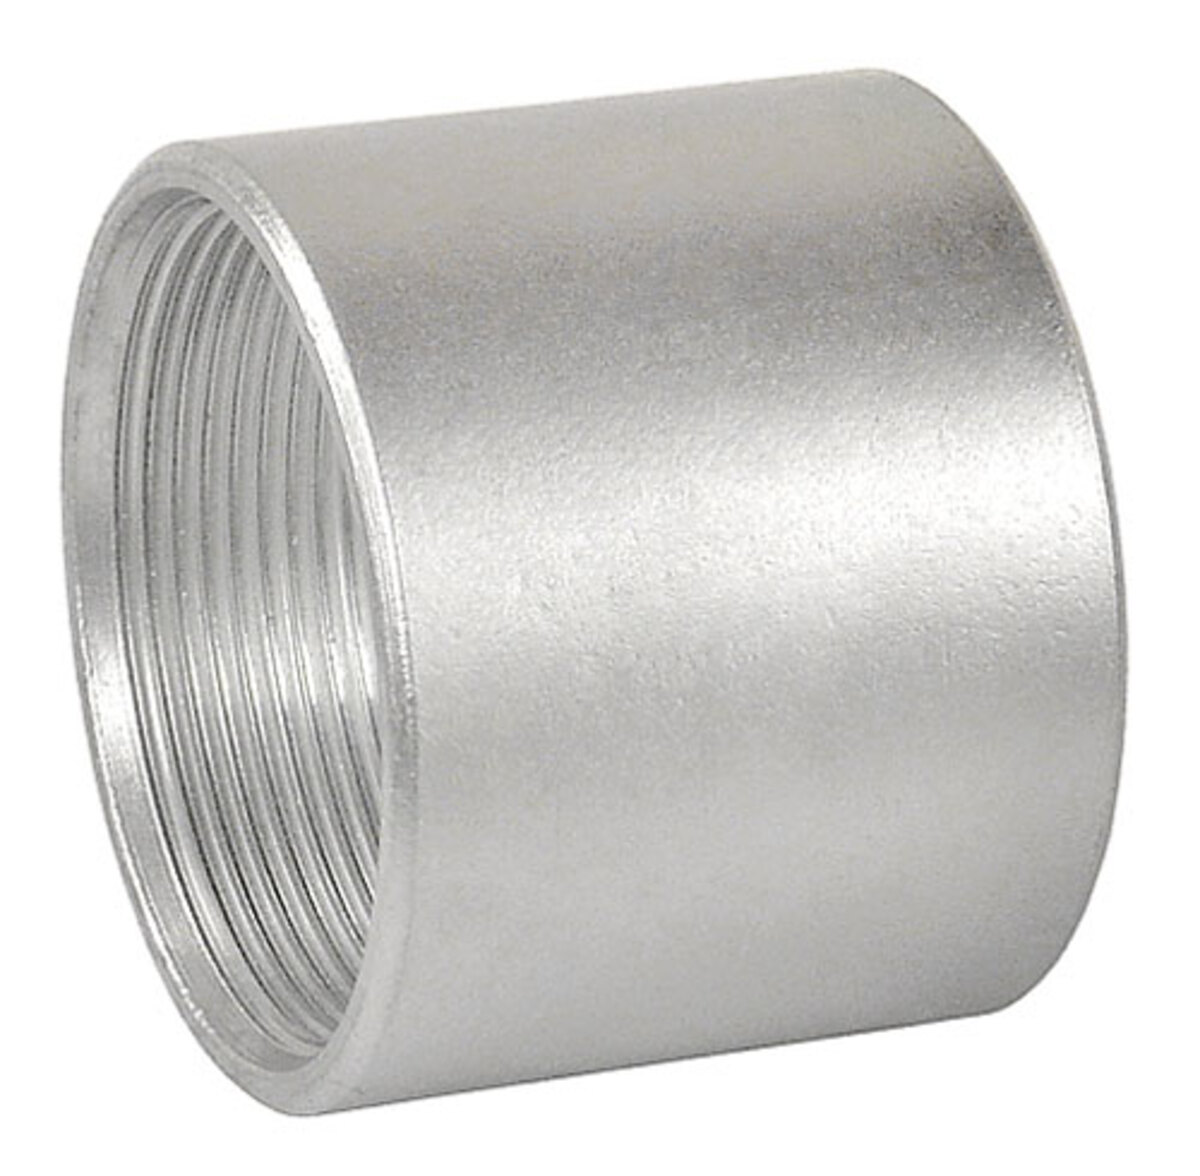 1/2" GROUND ROD COUPLING Allied Bolt Products LLC